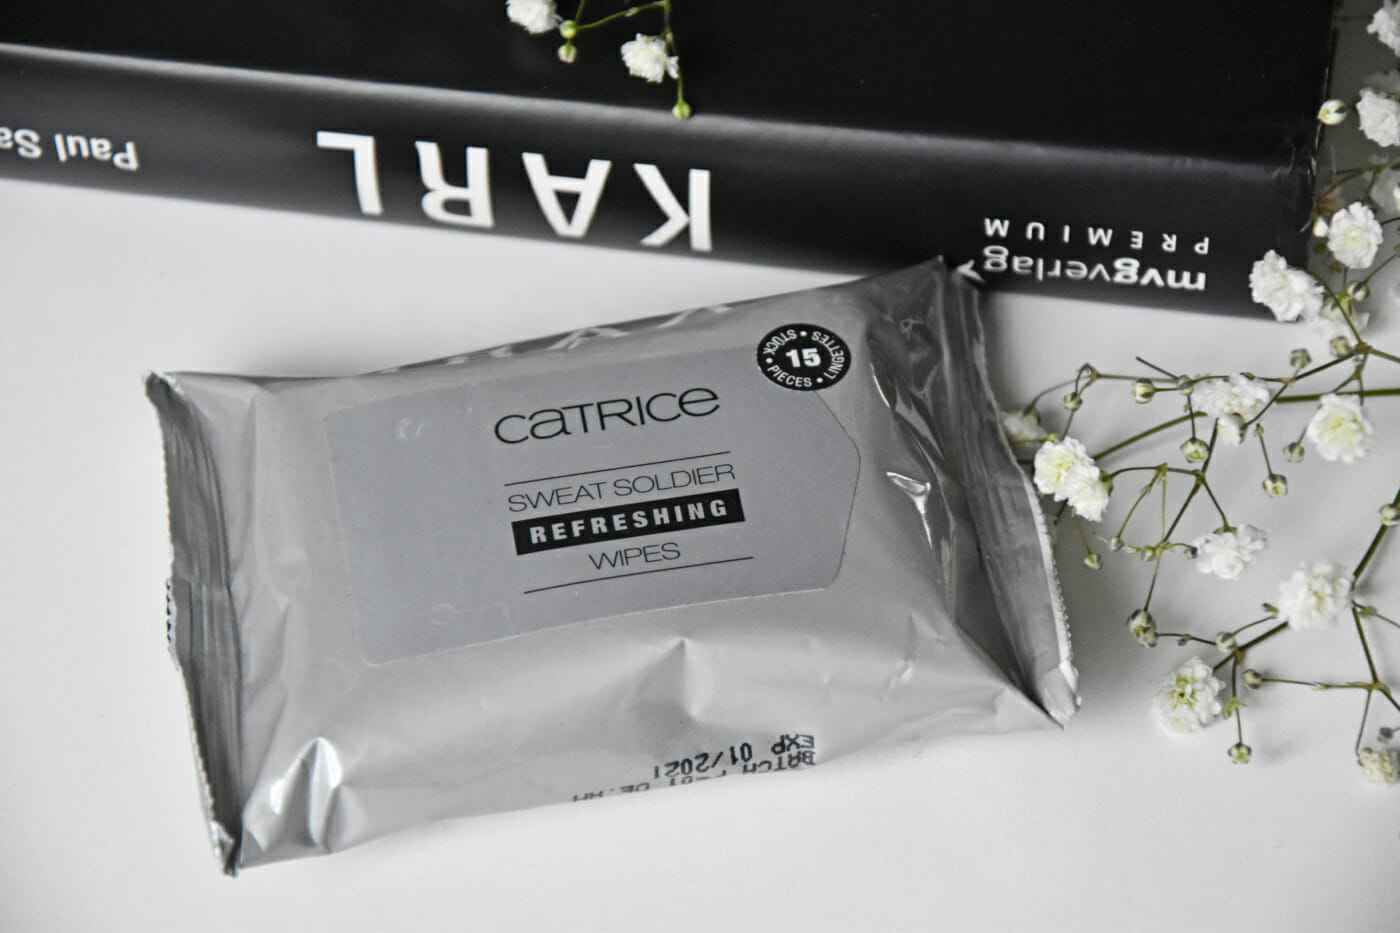 Catrice Sweat Soldier Refreshing Wipes